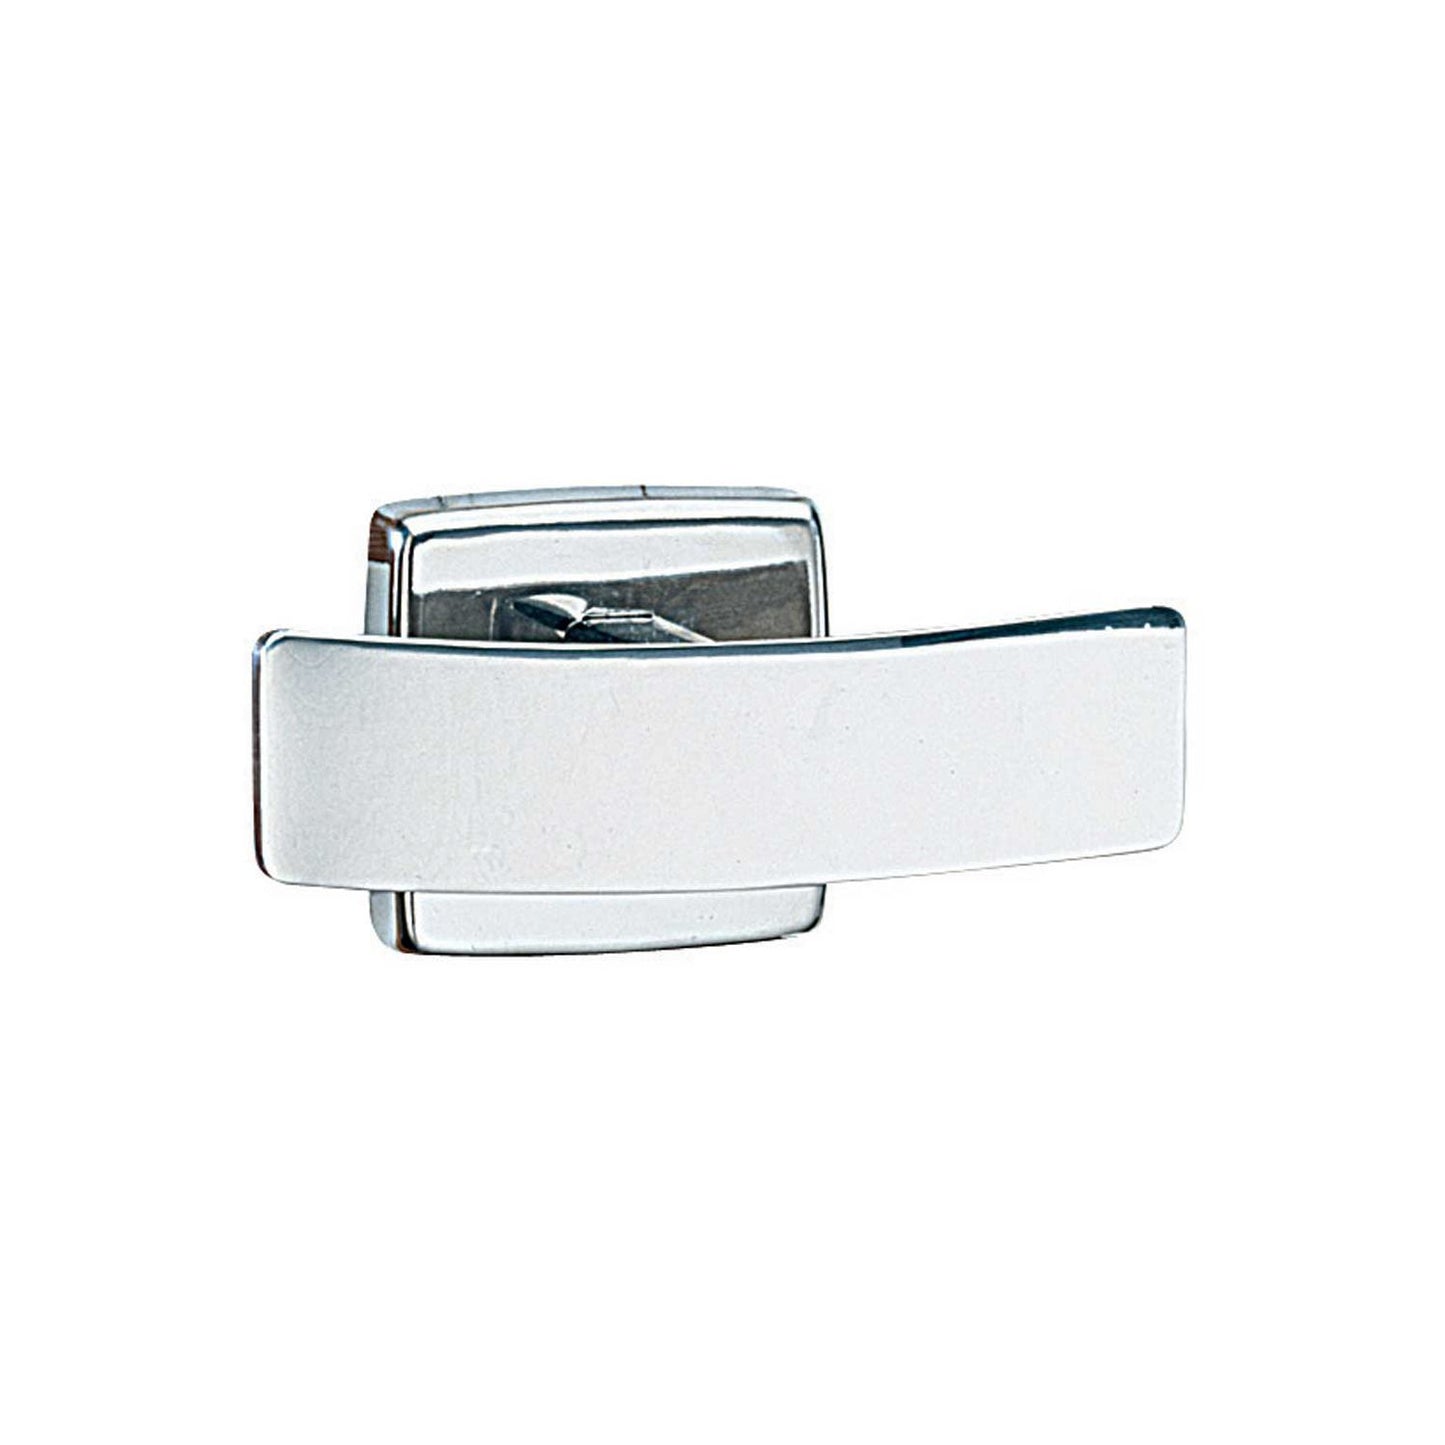 Bobrick 672 - 4" Double Robe Hook in Polished Stainless Steel